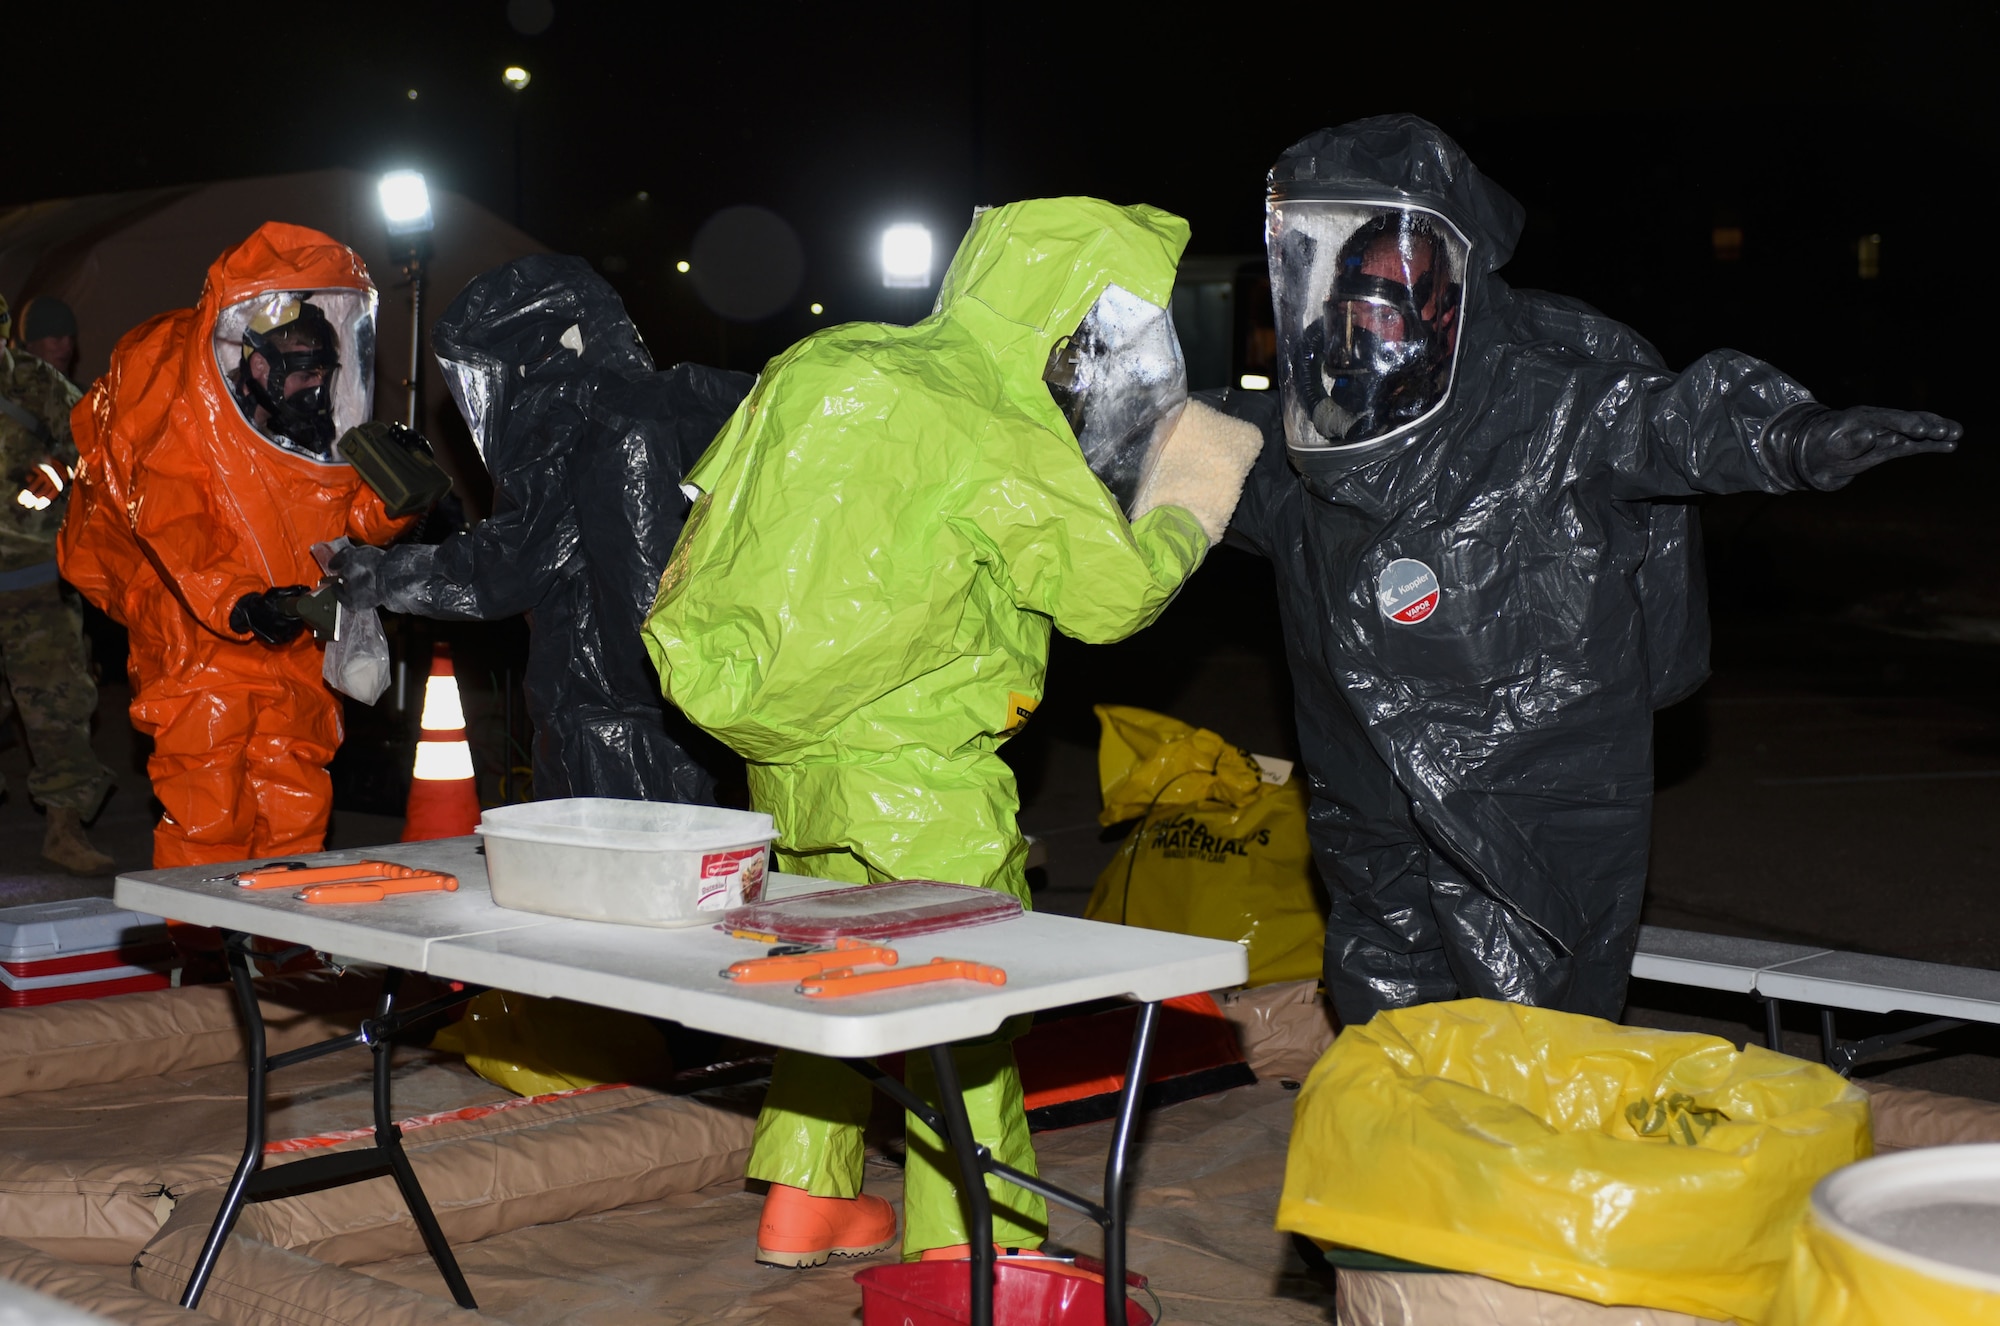 Airmen from the 28th Civil Engineer Squadron and members of the South Dakota National Guard participate in a joint training exercise at Ellsworth Air Force Base, S.D., Jan. 10, 2017. After responding to a simulated training, participants went through a decontamination line to properly dispose of possibly contaminated gear. (U.S. Air Force photo by Airman 1st Class Denise M. Jenson)